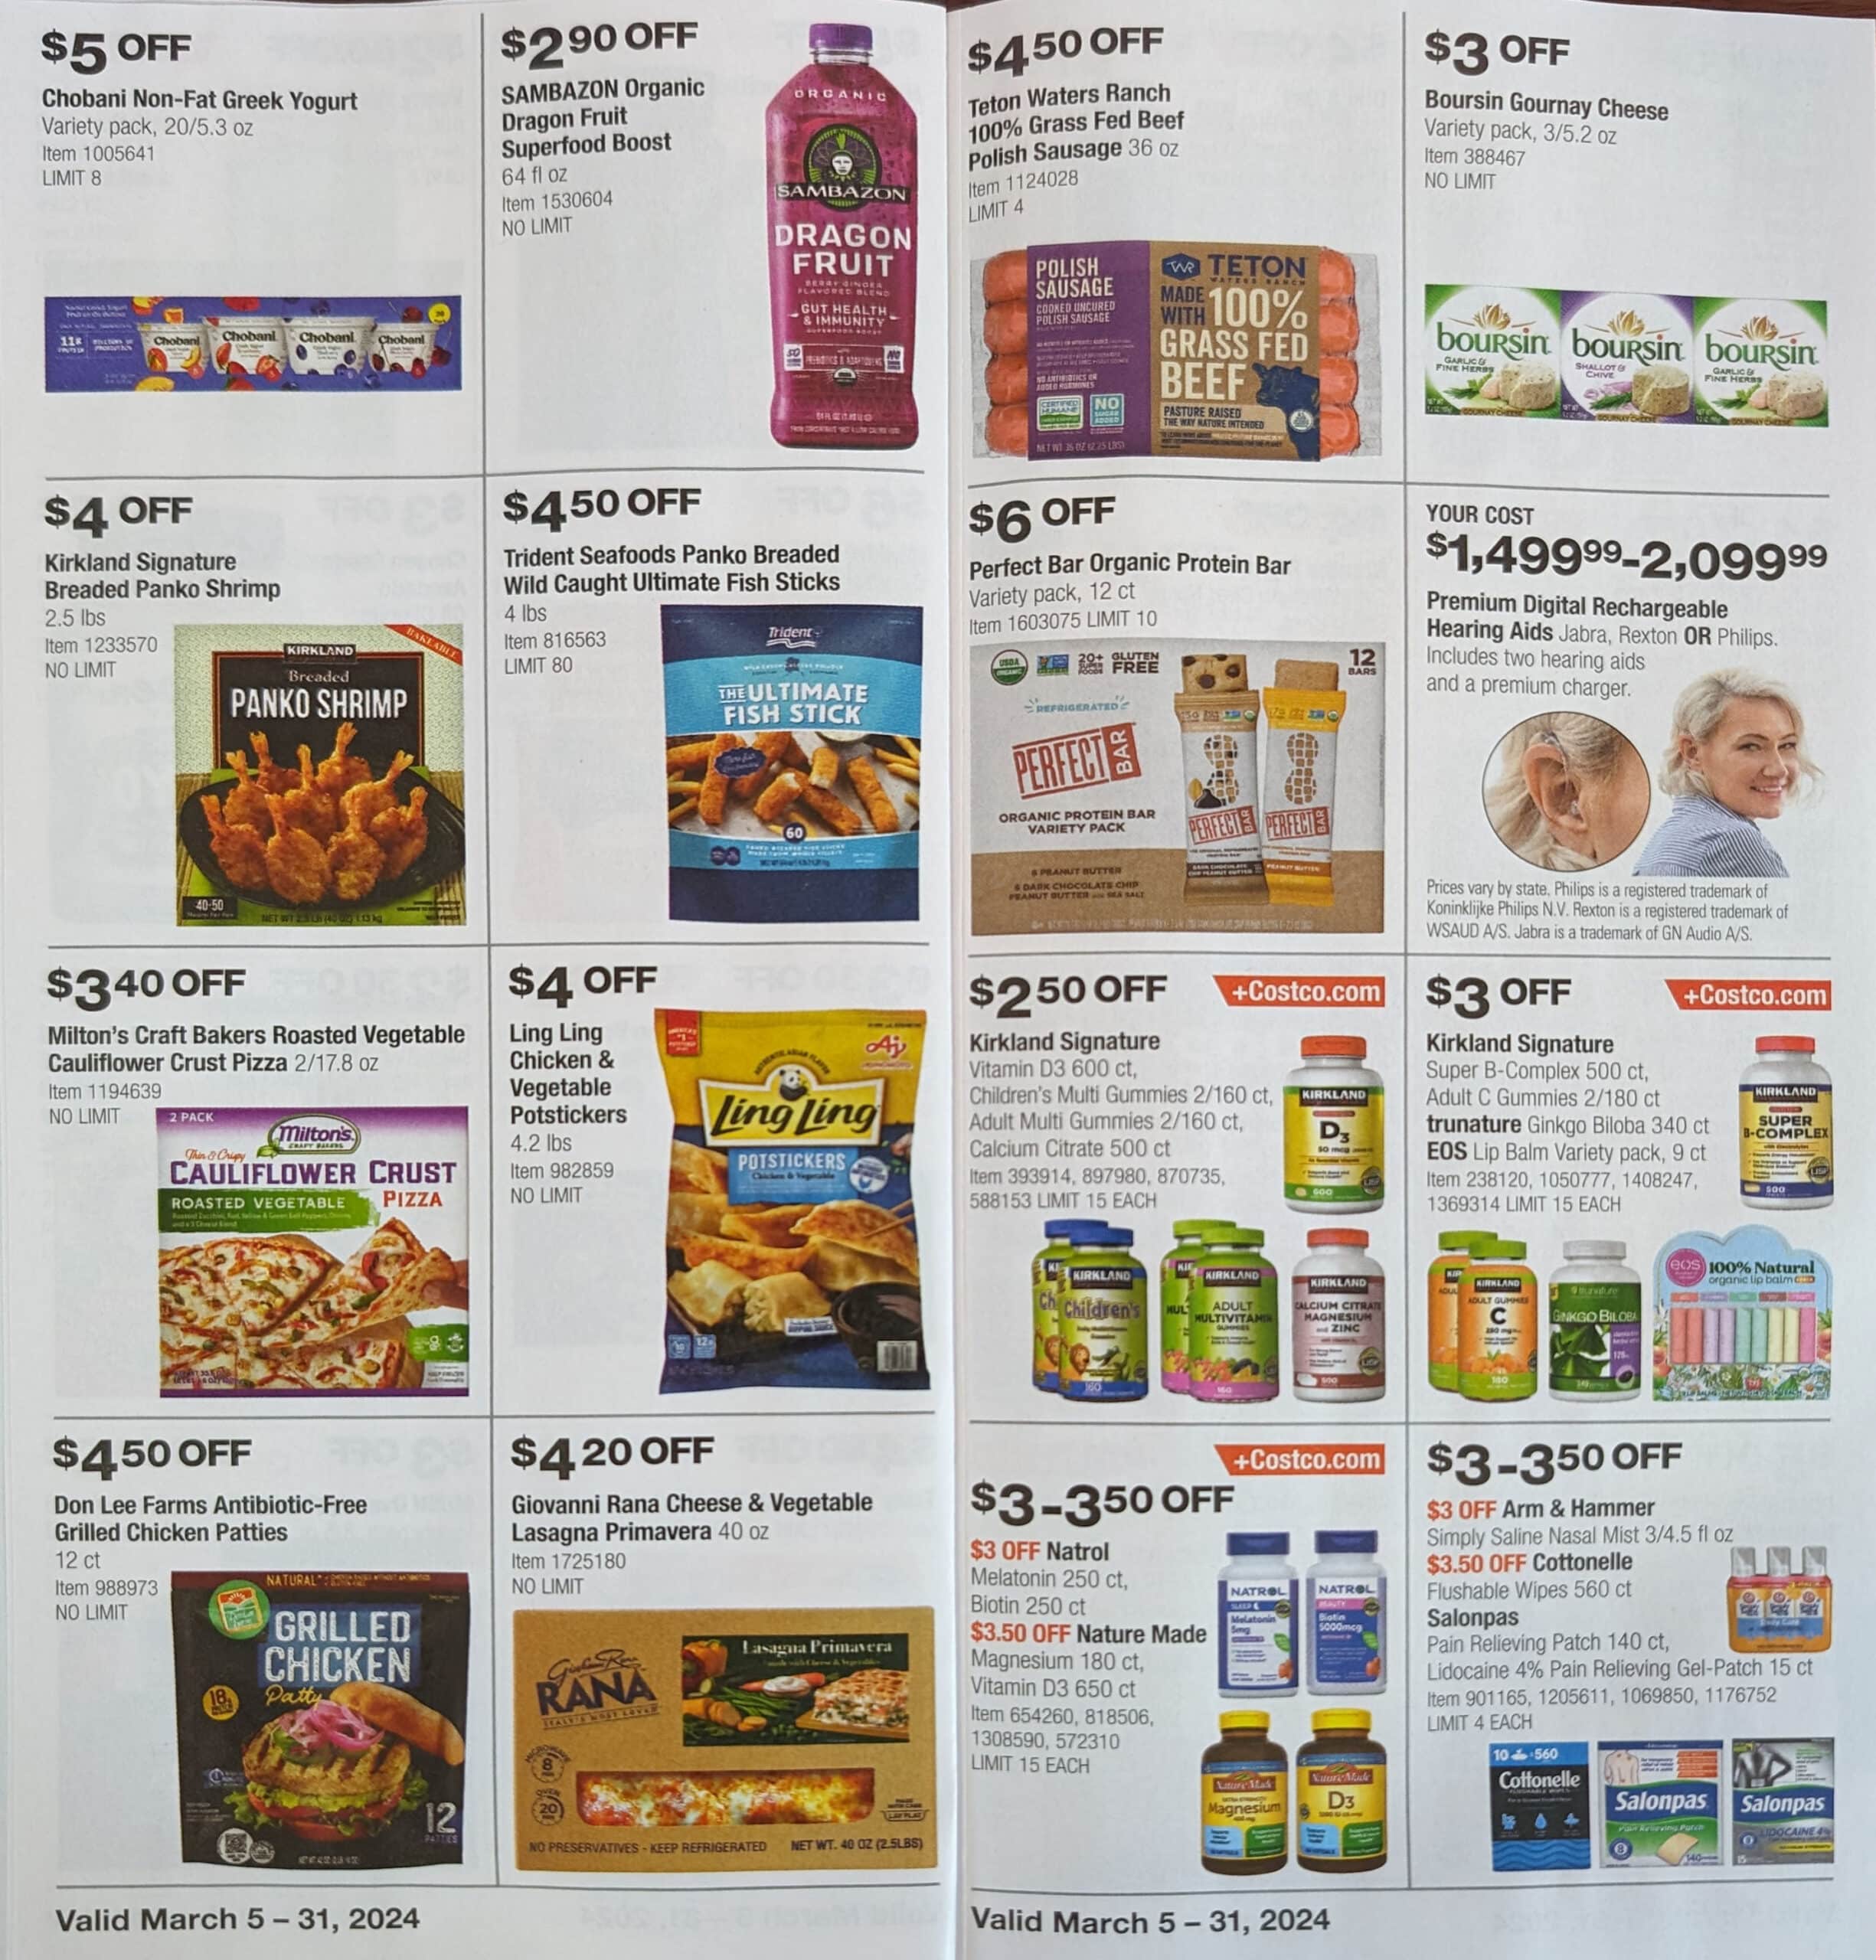 Costco Flyer & Costco Sale Items for Sep 28 - Oct 4, 2020, for BC, AB, SK,  MB - Costco West Fan Blog